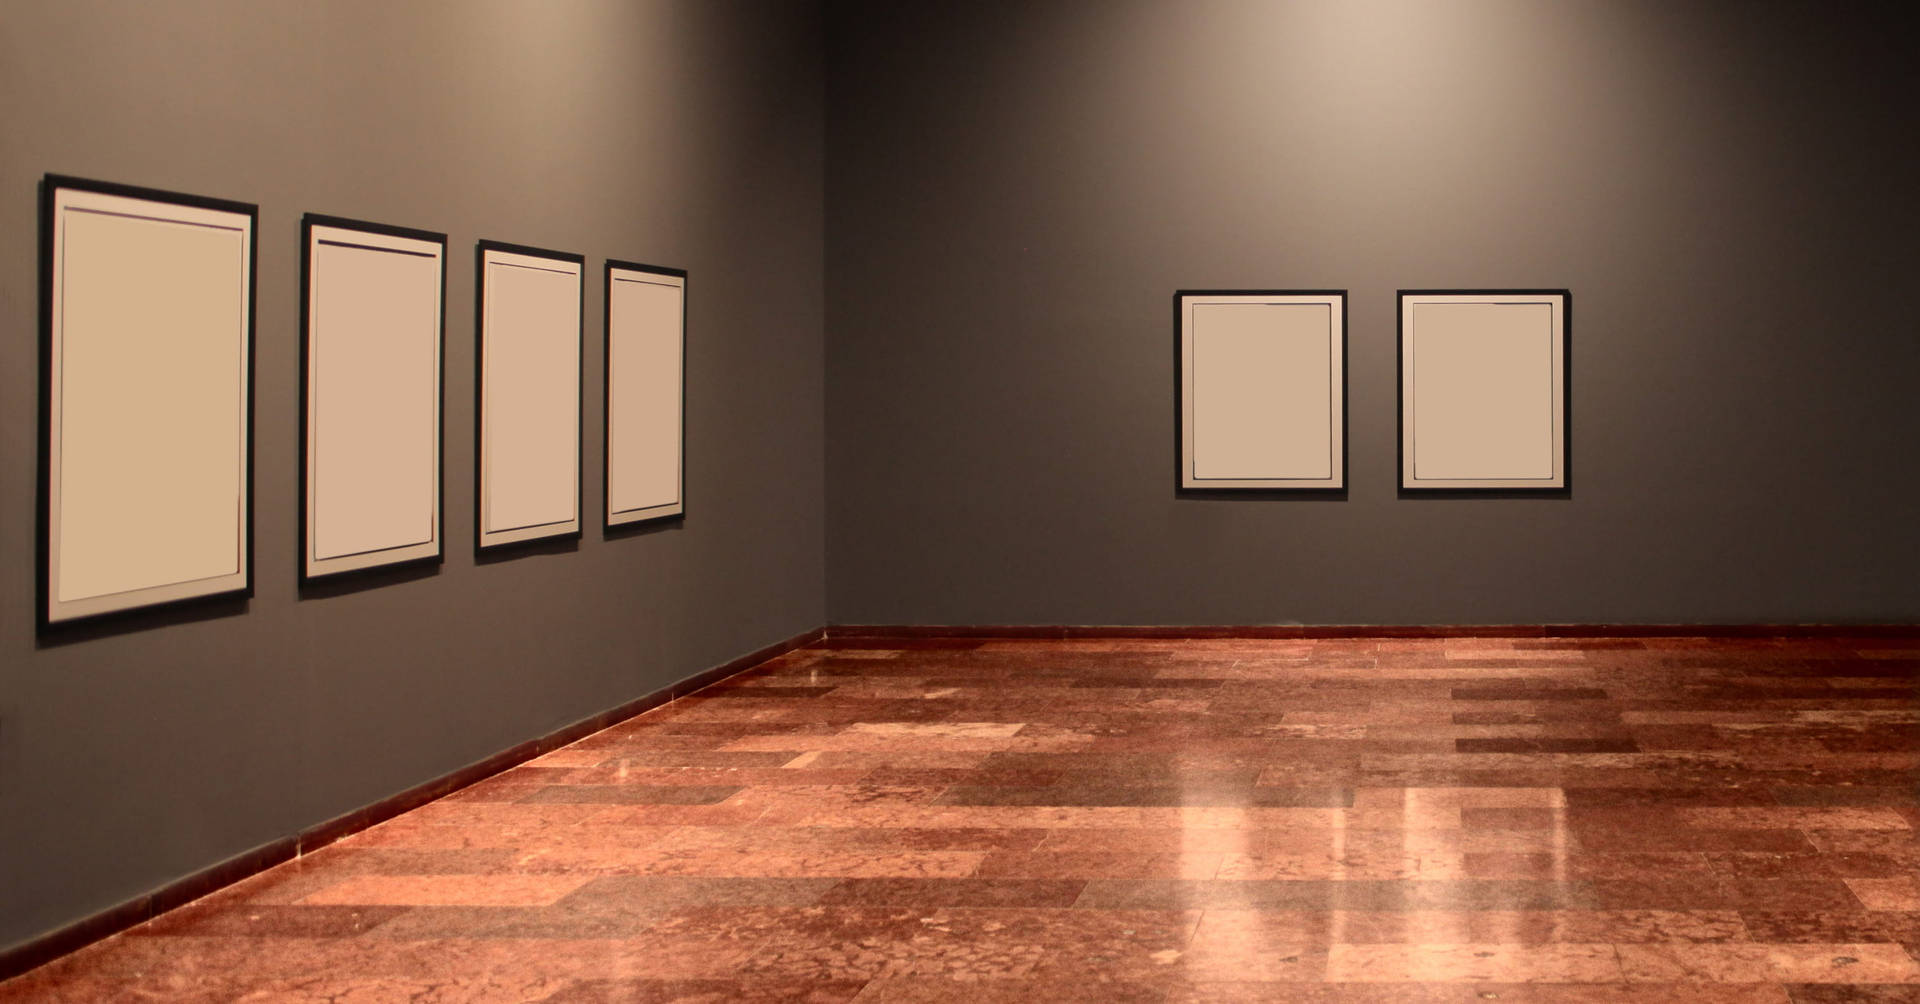 Framed Blank Canvases In Art Gallery